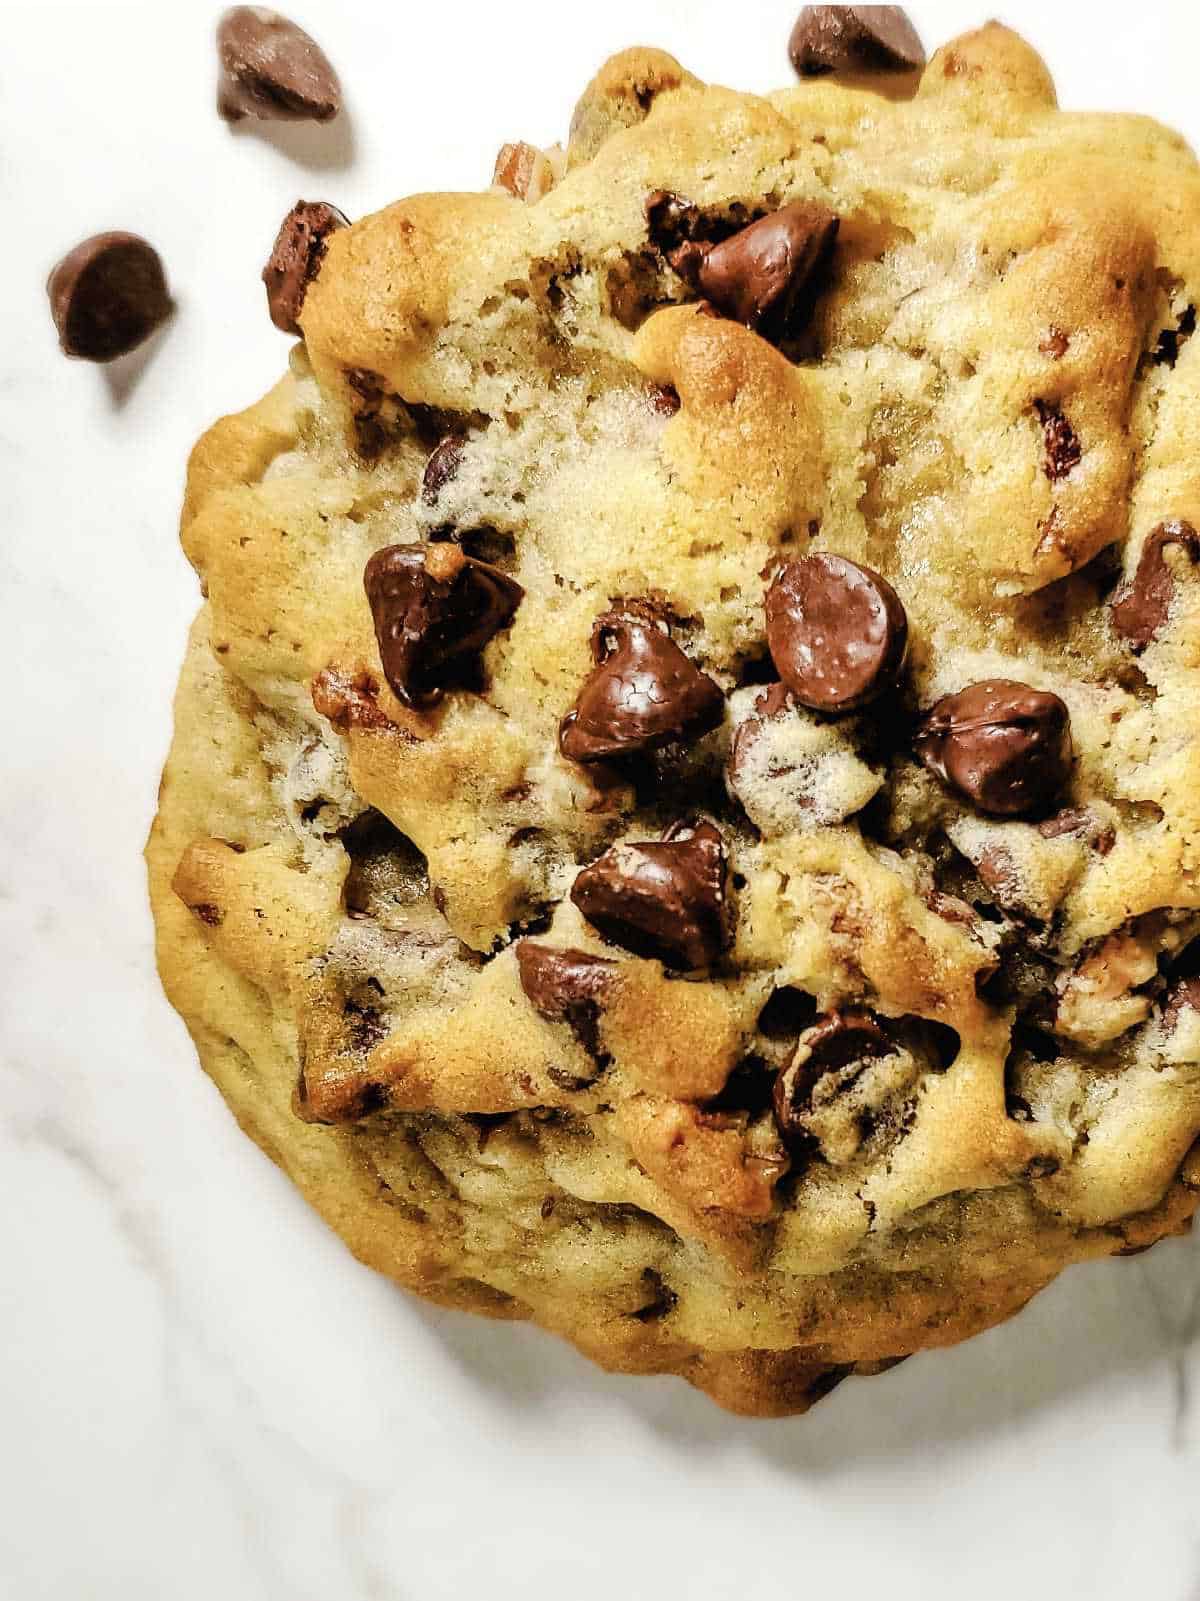 large chocolate chip cookie on a white marble surface.